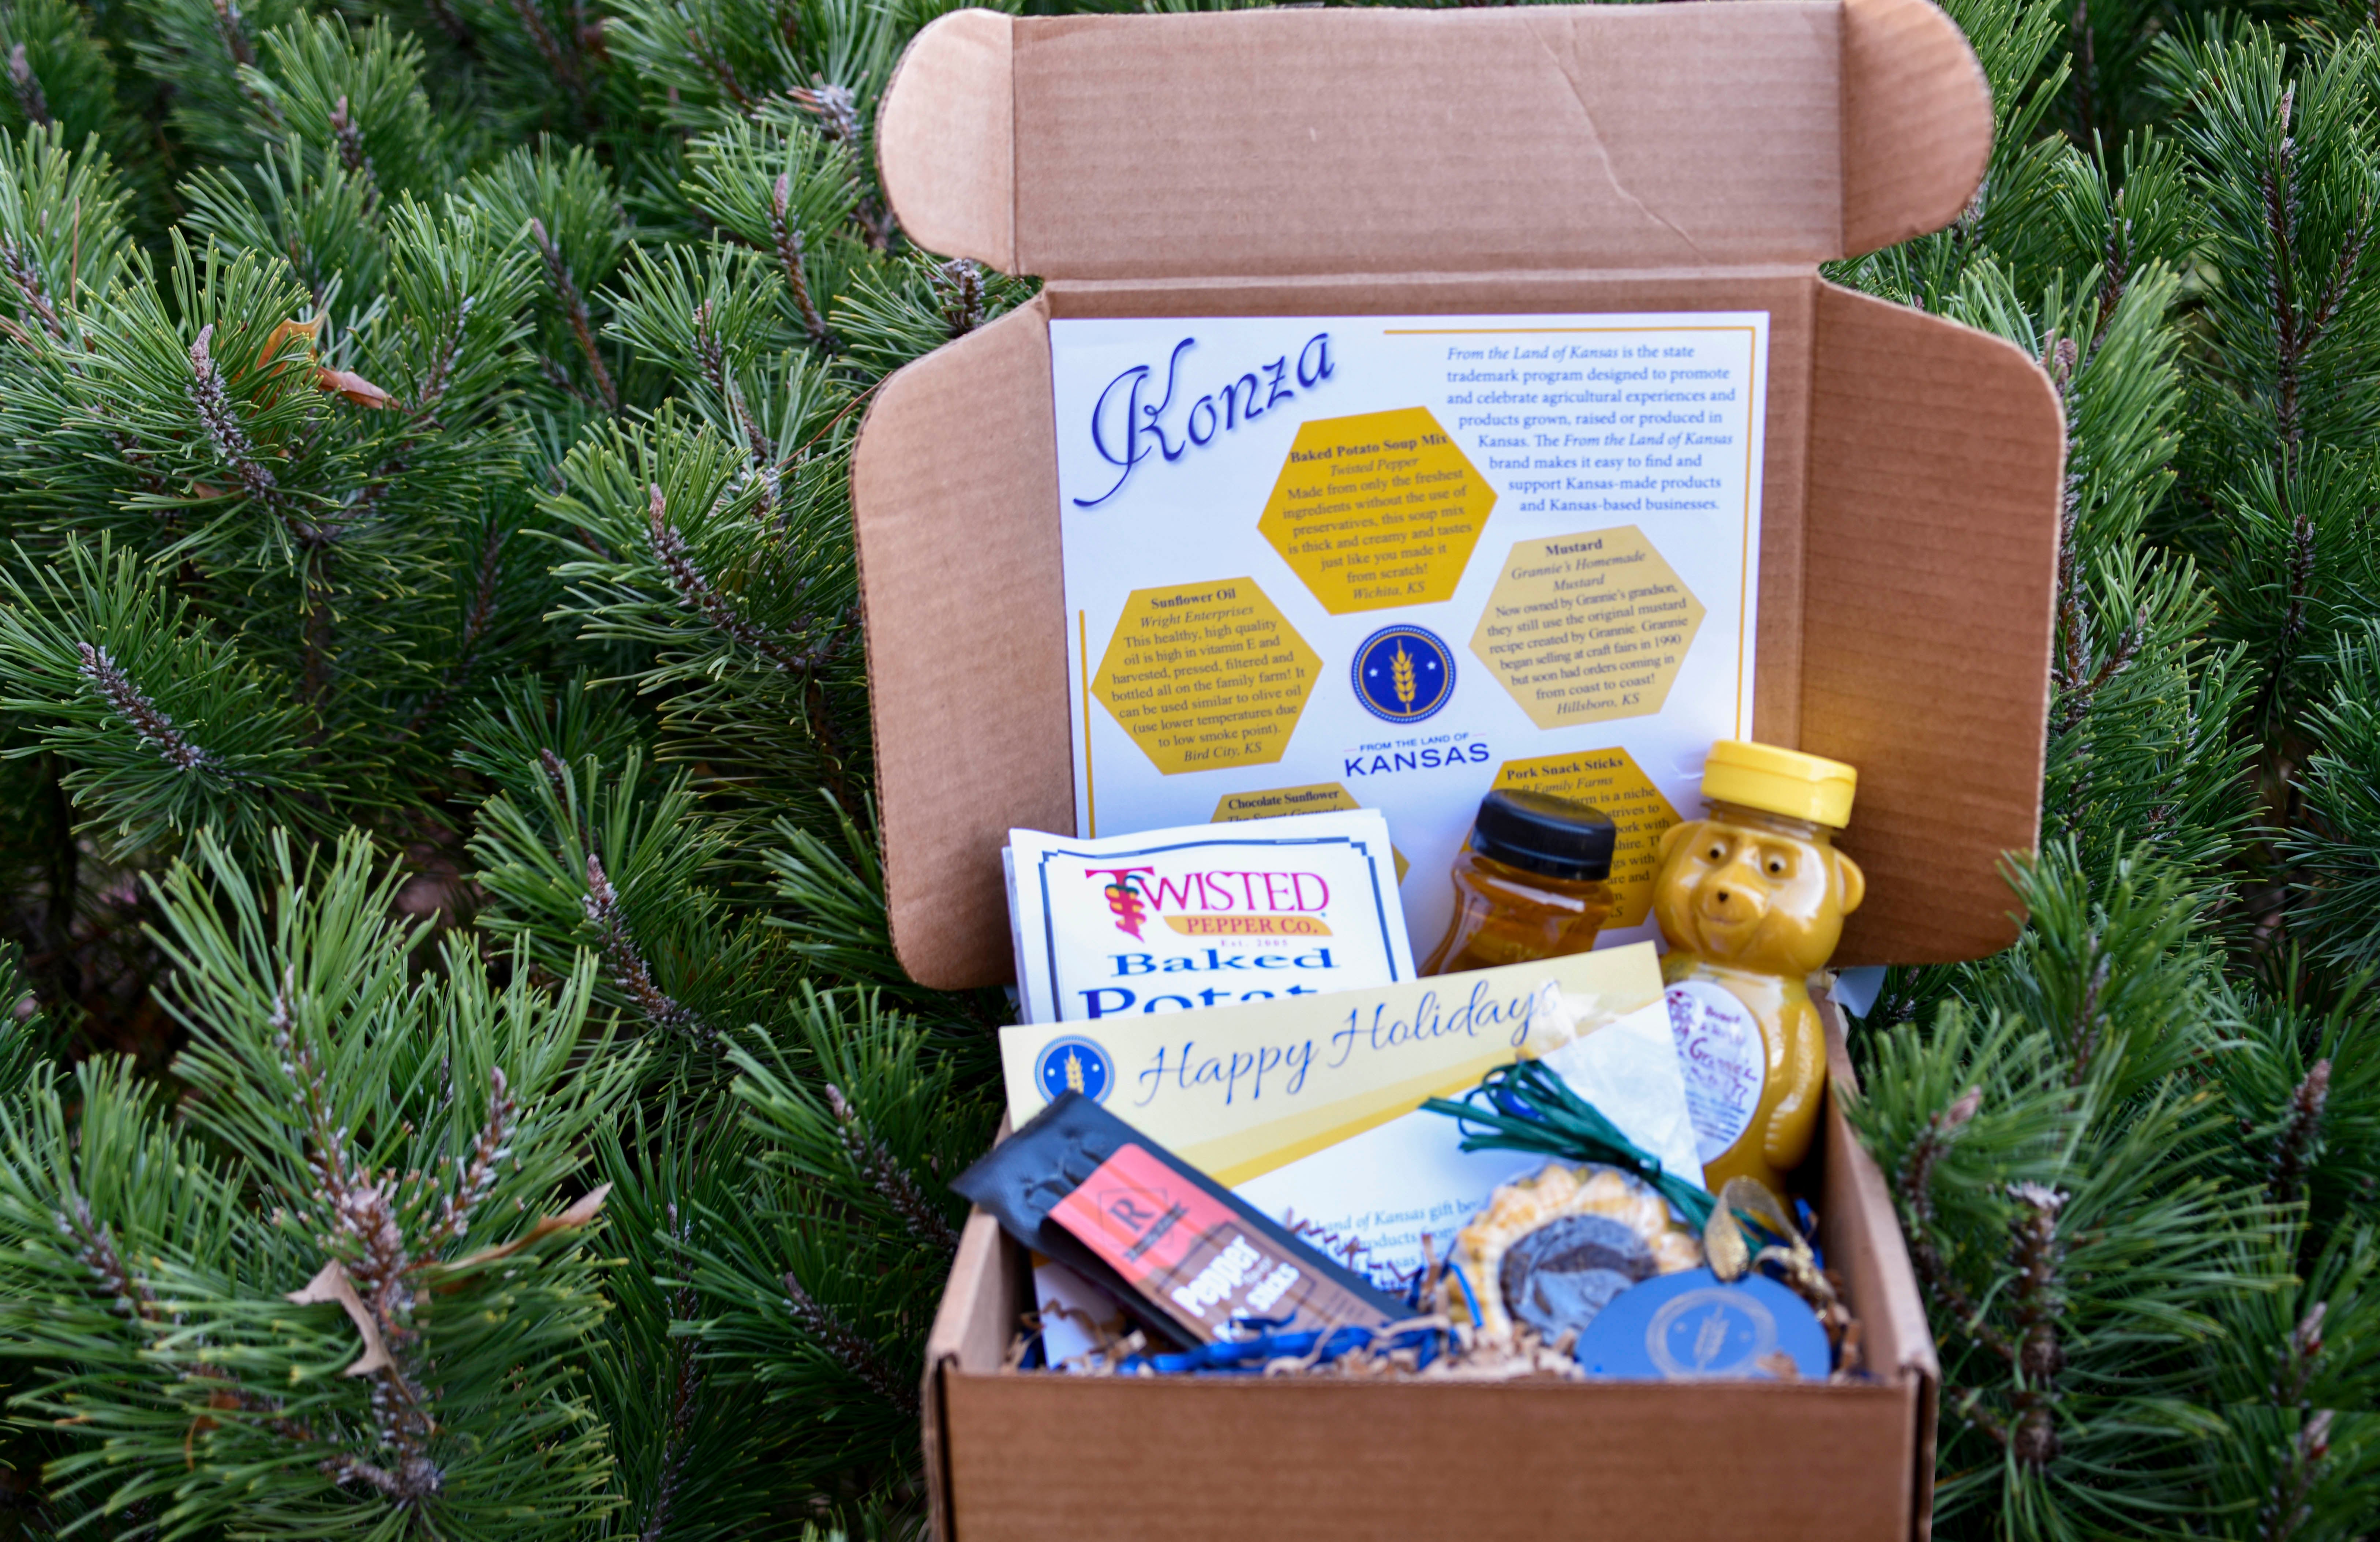 Reader Contest! Photo of the gift box being distributed as prizes for winners.